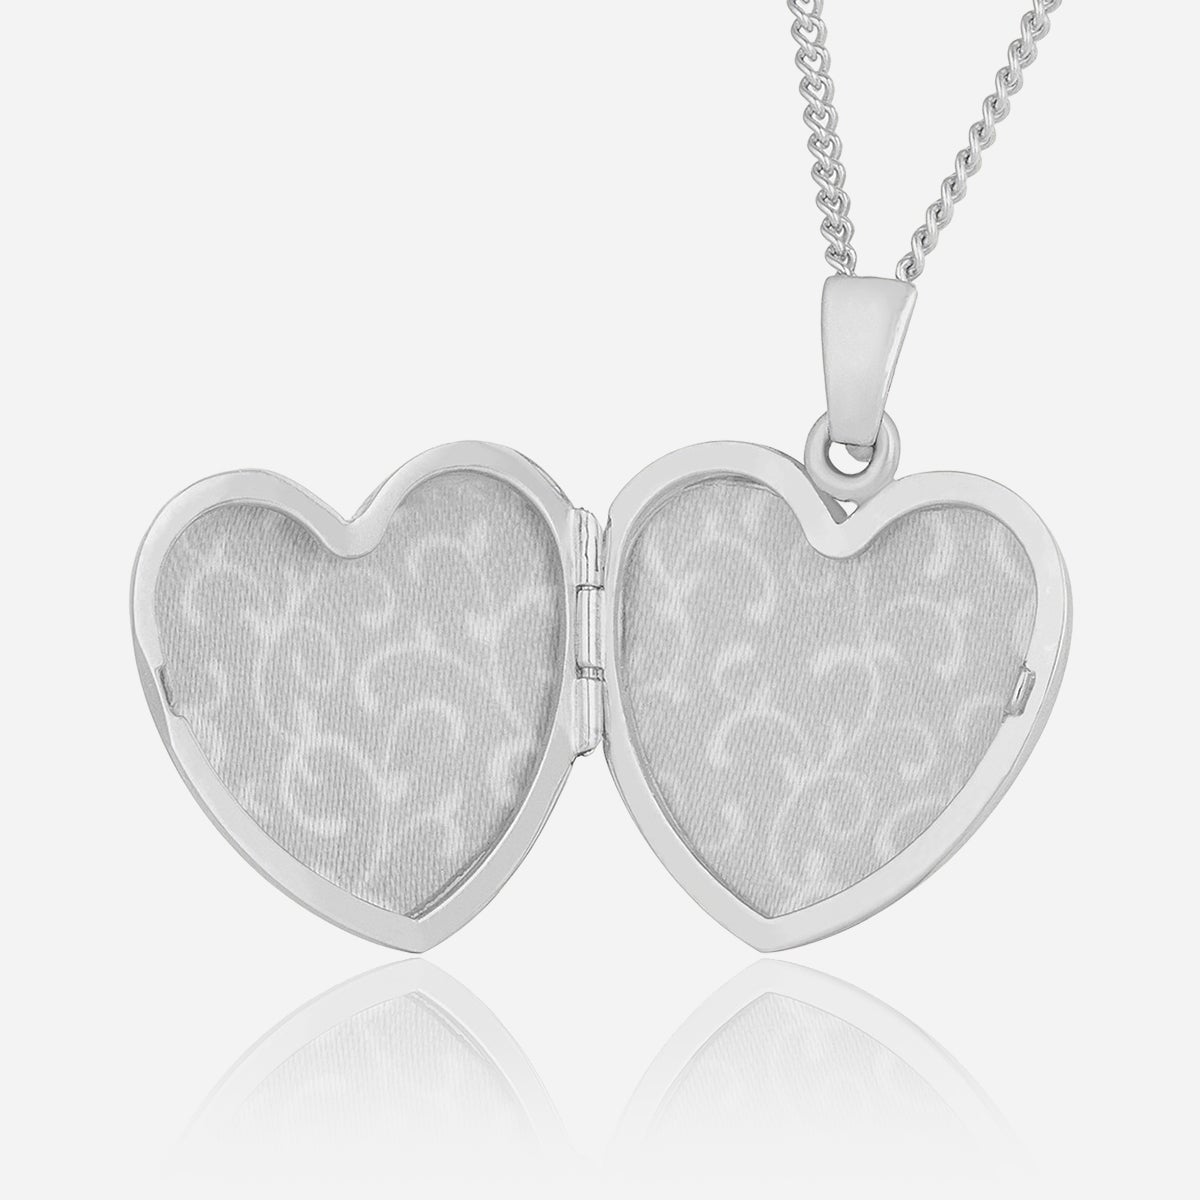 Product title: Silver Bouquet Locket, product type: Locket